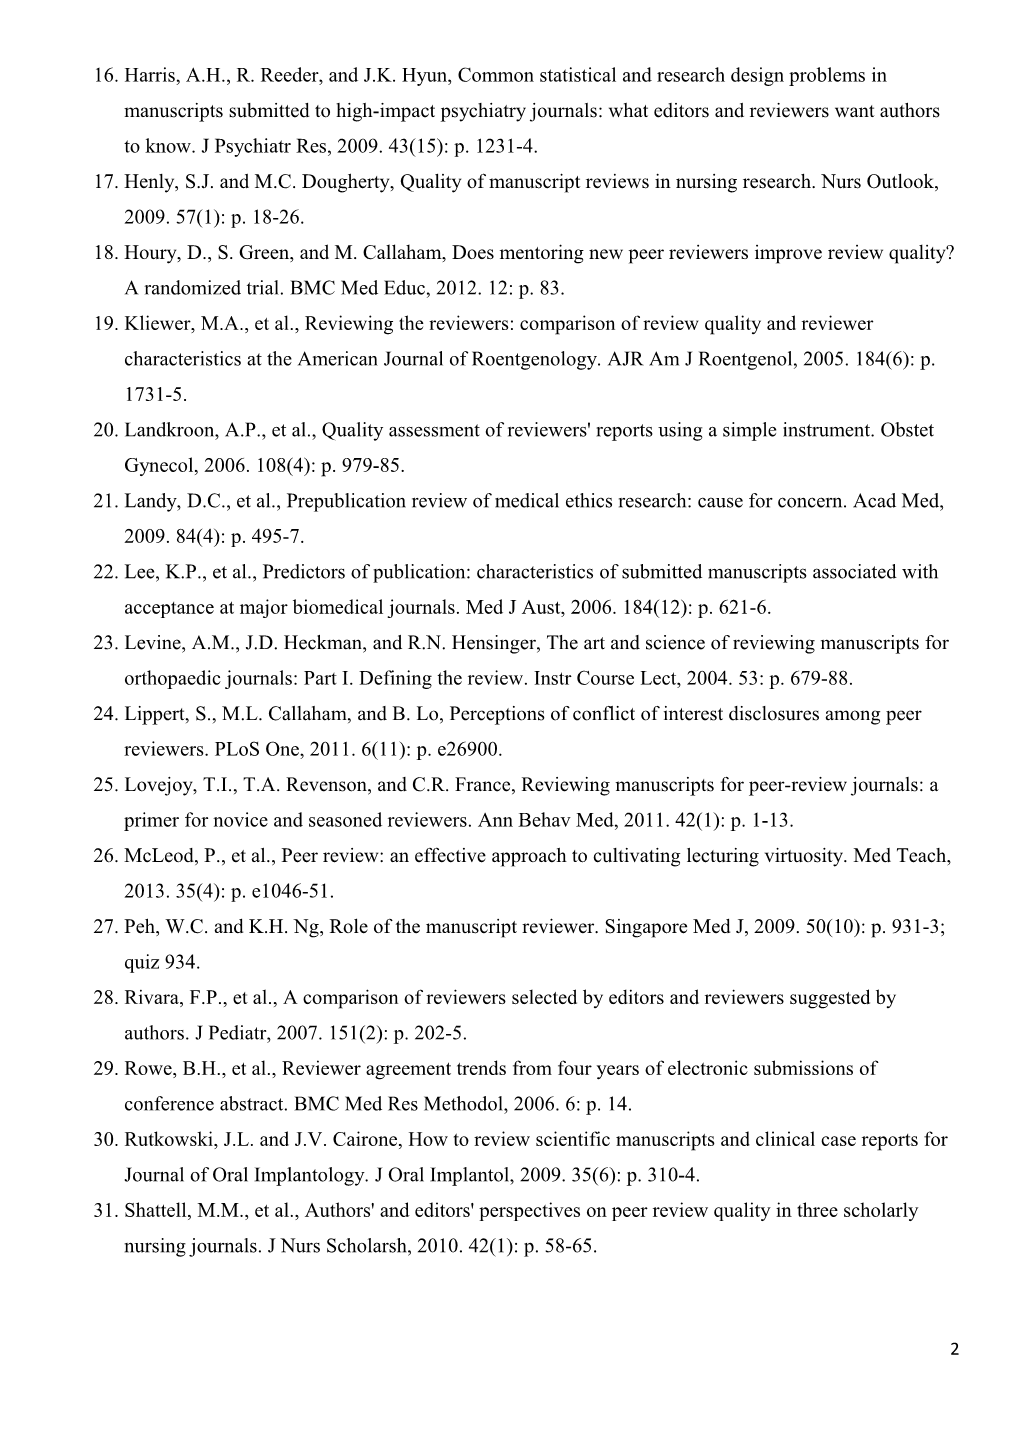 Additional File5. Articles Selected During the Literature Review